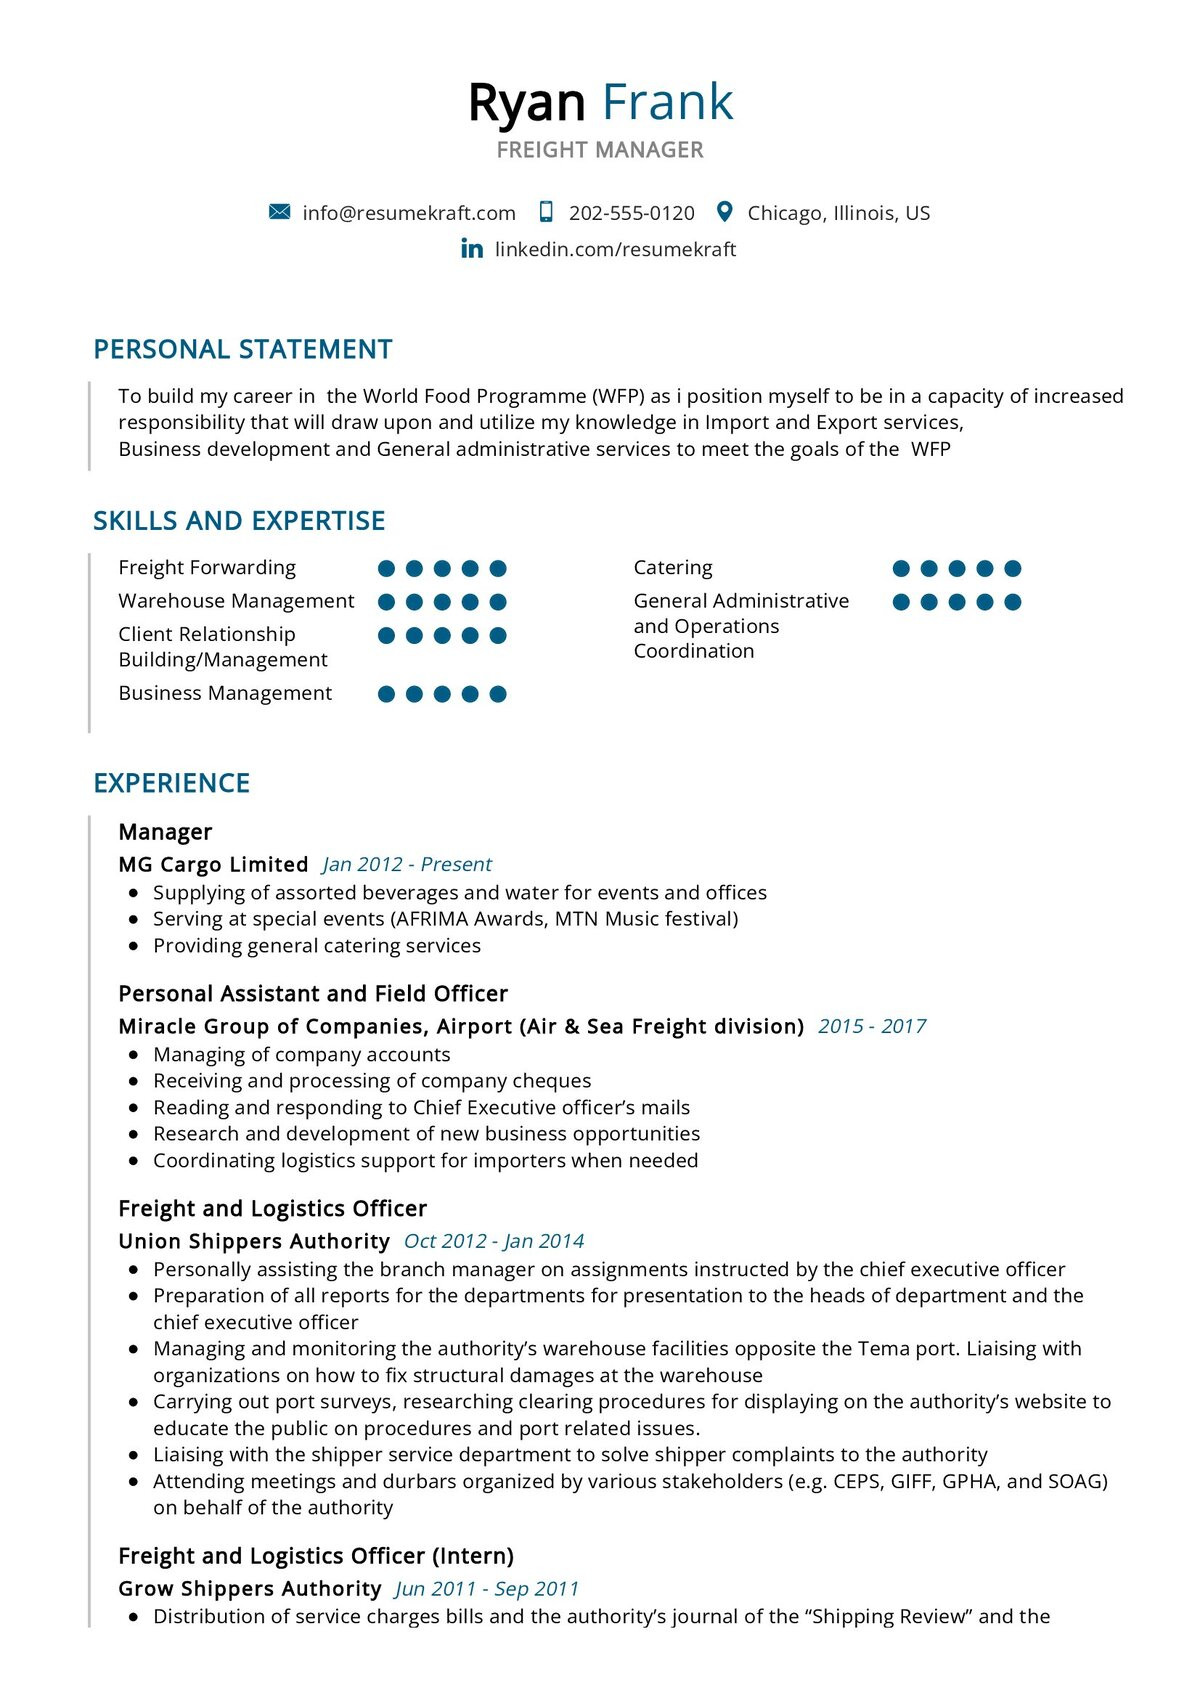 Sample Resume for Shipper and Receiver Freight Manager Resume Example 2022 Writing Tips – Resumekraft